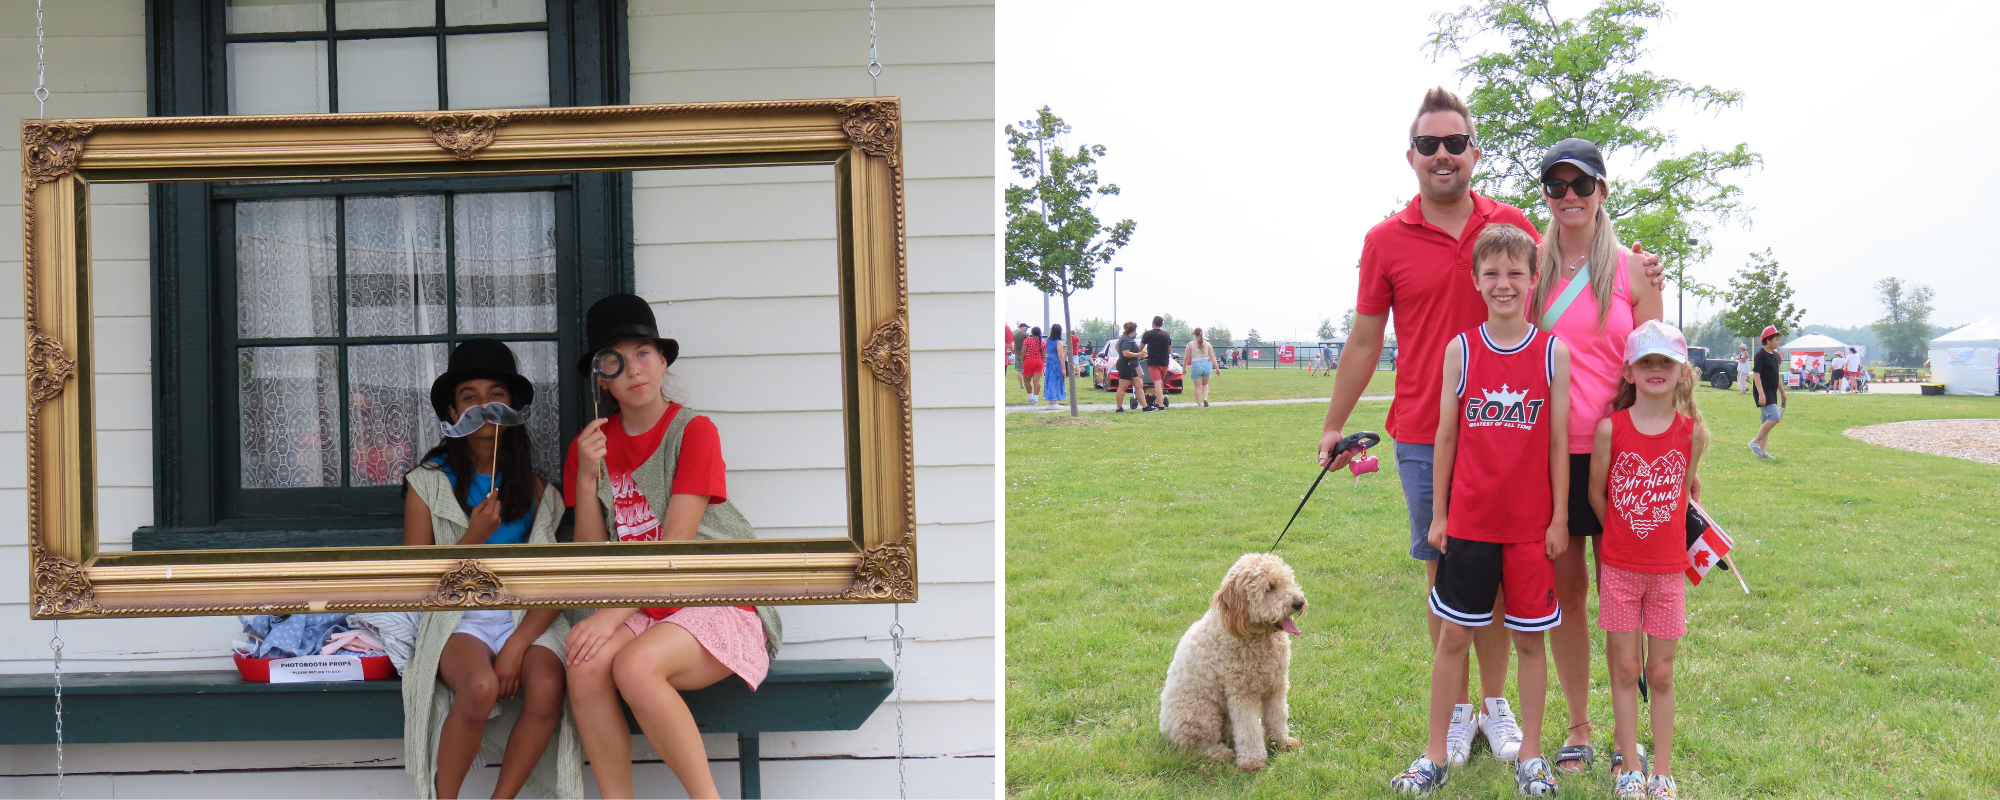 Left 2 girls sitting on a bench with props behind a frame right family dressed in red with dog on leash in field